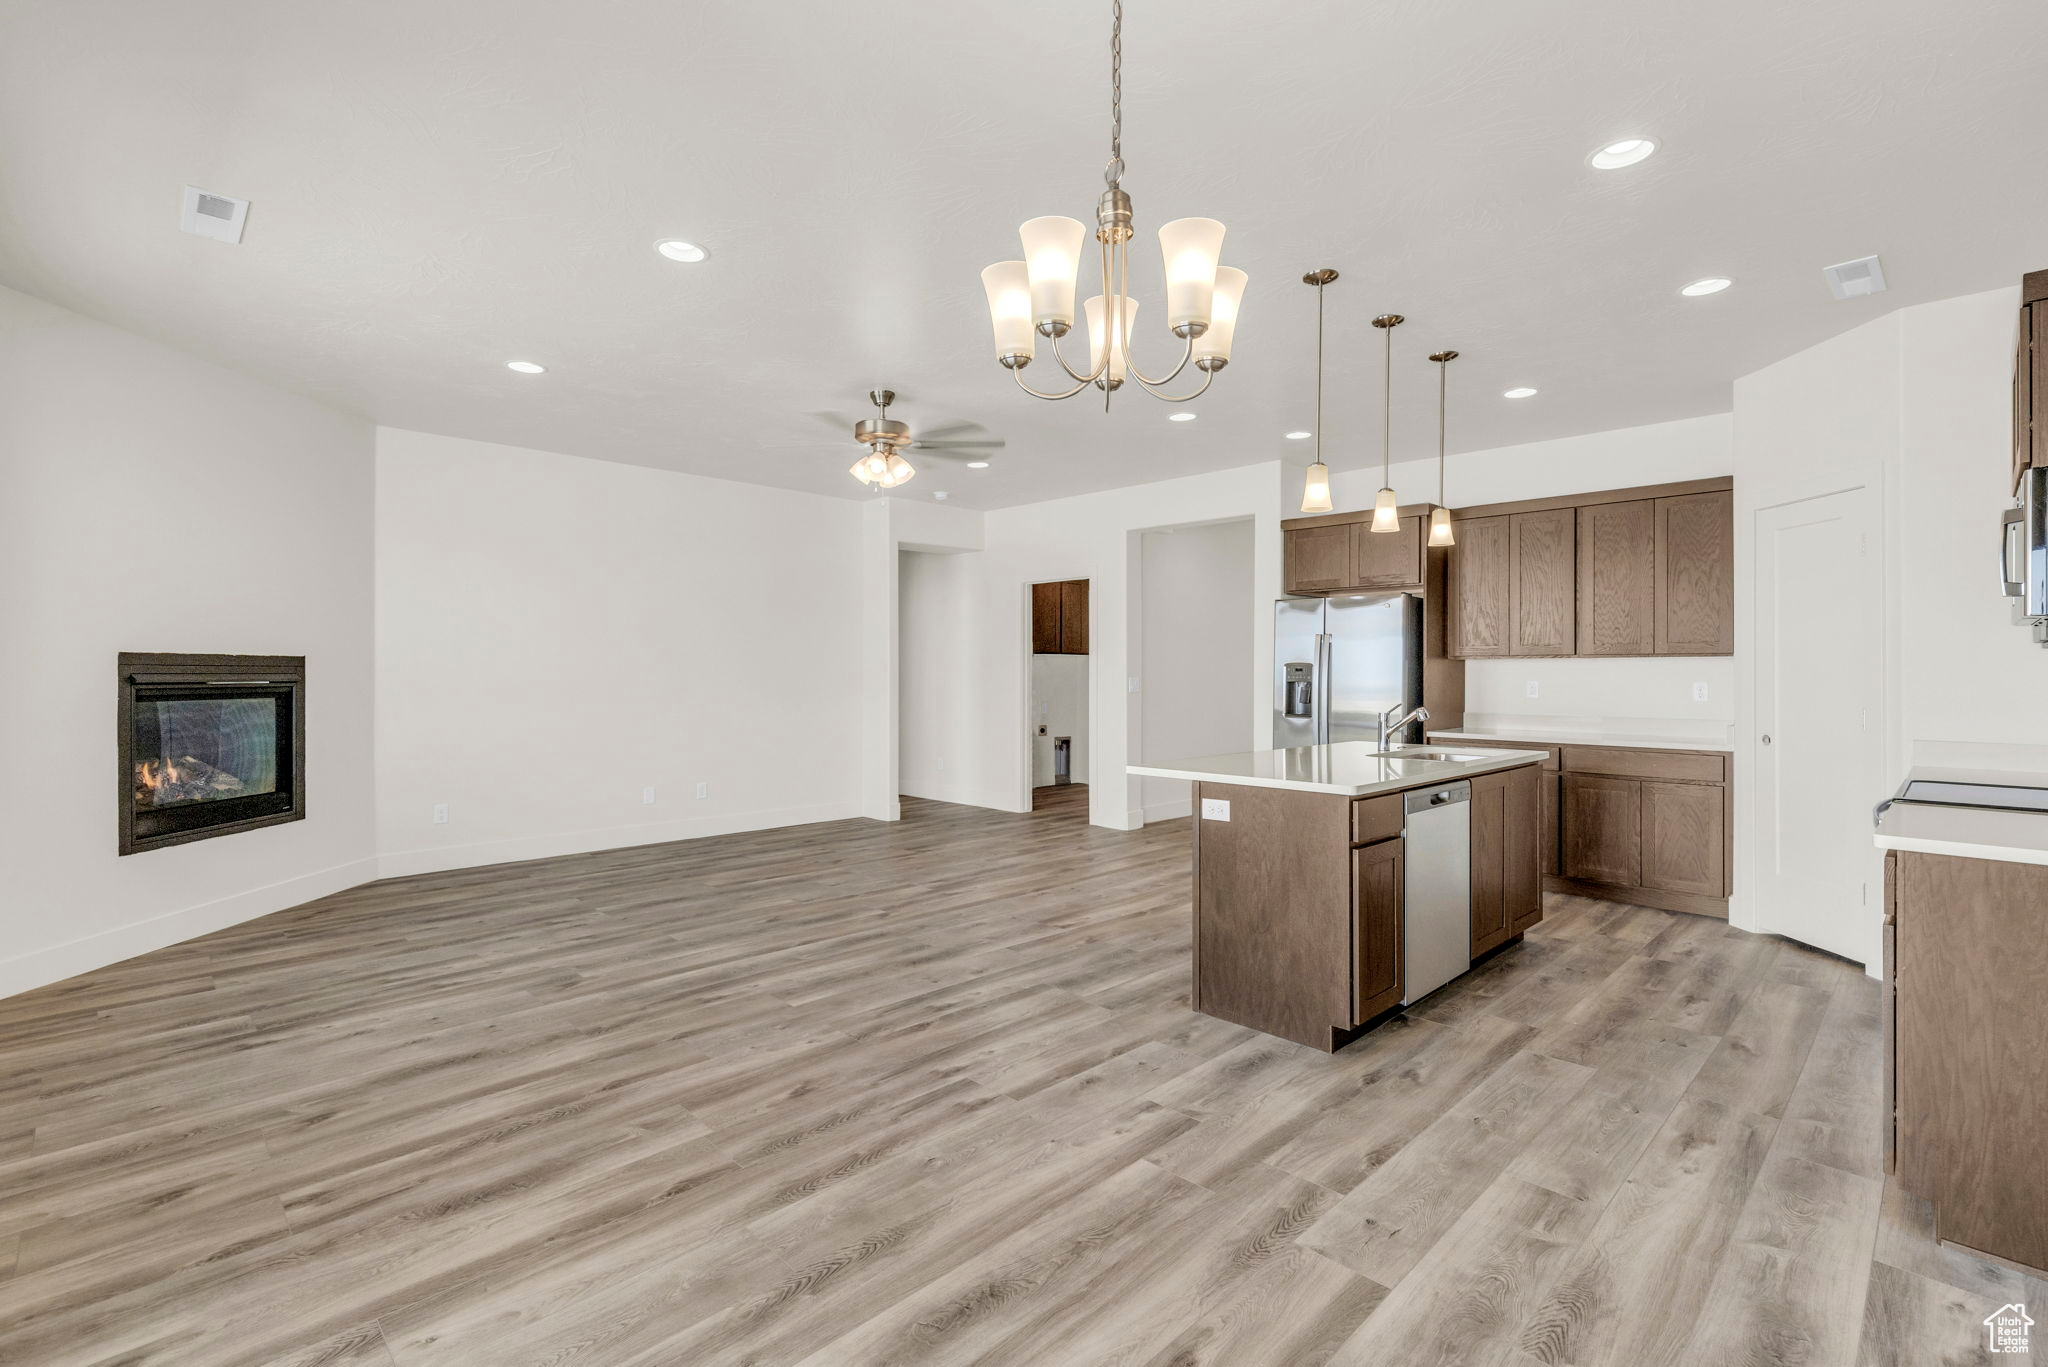 Kitchen featuring ceiling fan with notable chandelier, a center island with sink, light hardwood / wood-style floors, appliances with stainless steel finishes, and hanging light fixtures